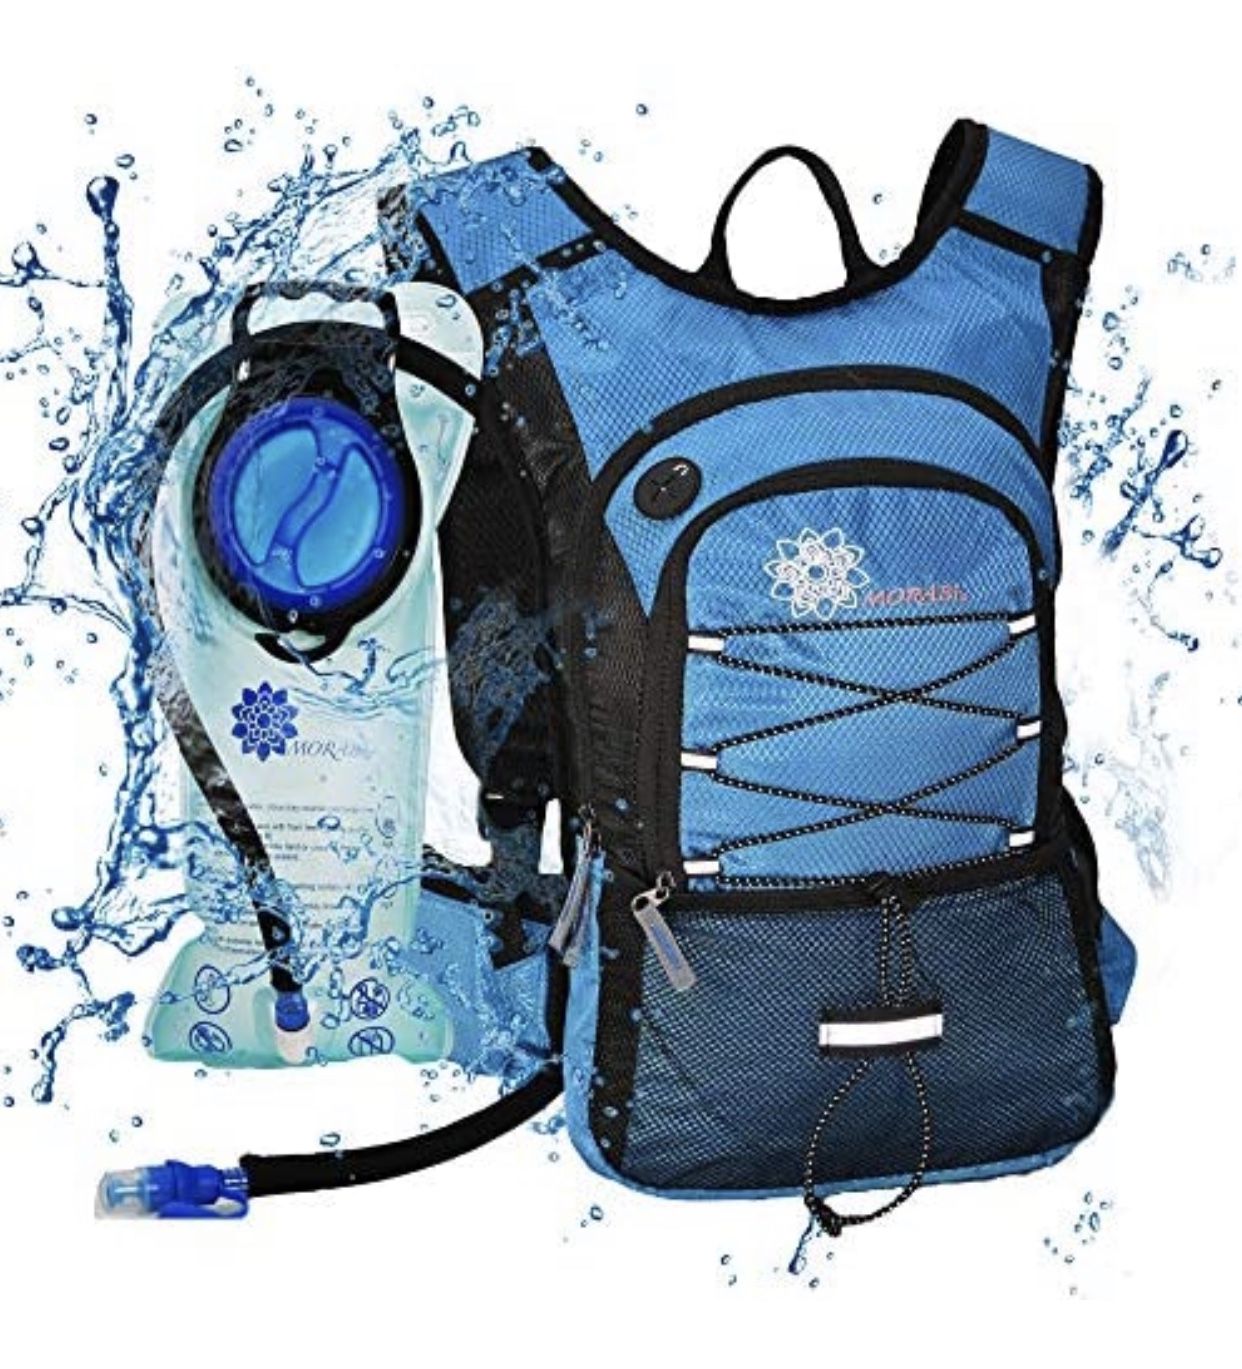 LOT SALE!!! 600+ 2L Hydration backpacks and Camping Bags!!